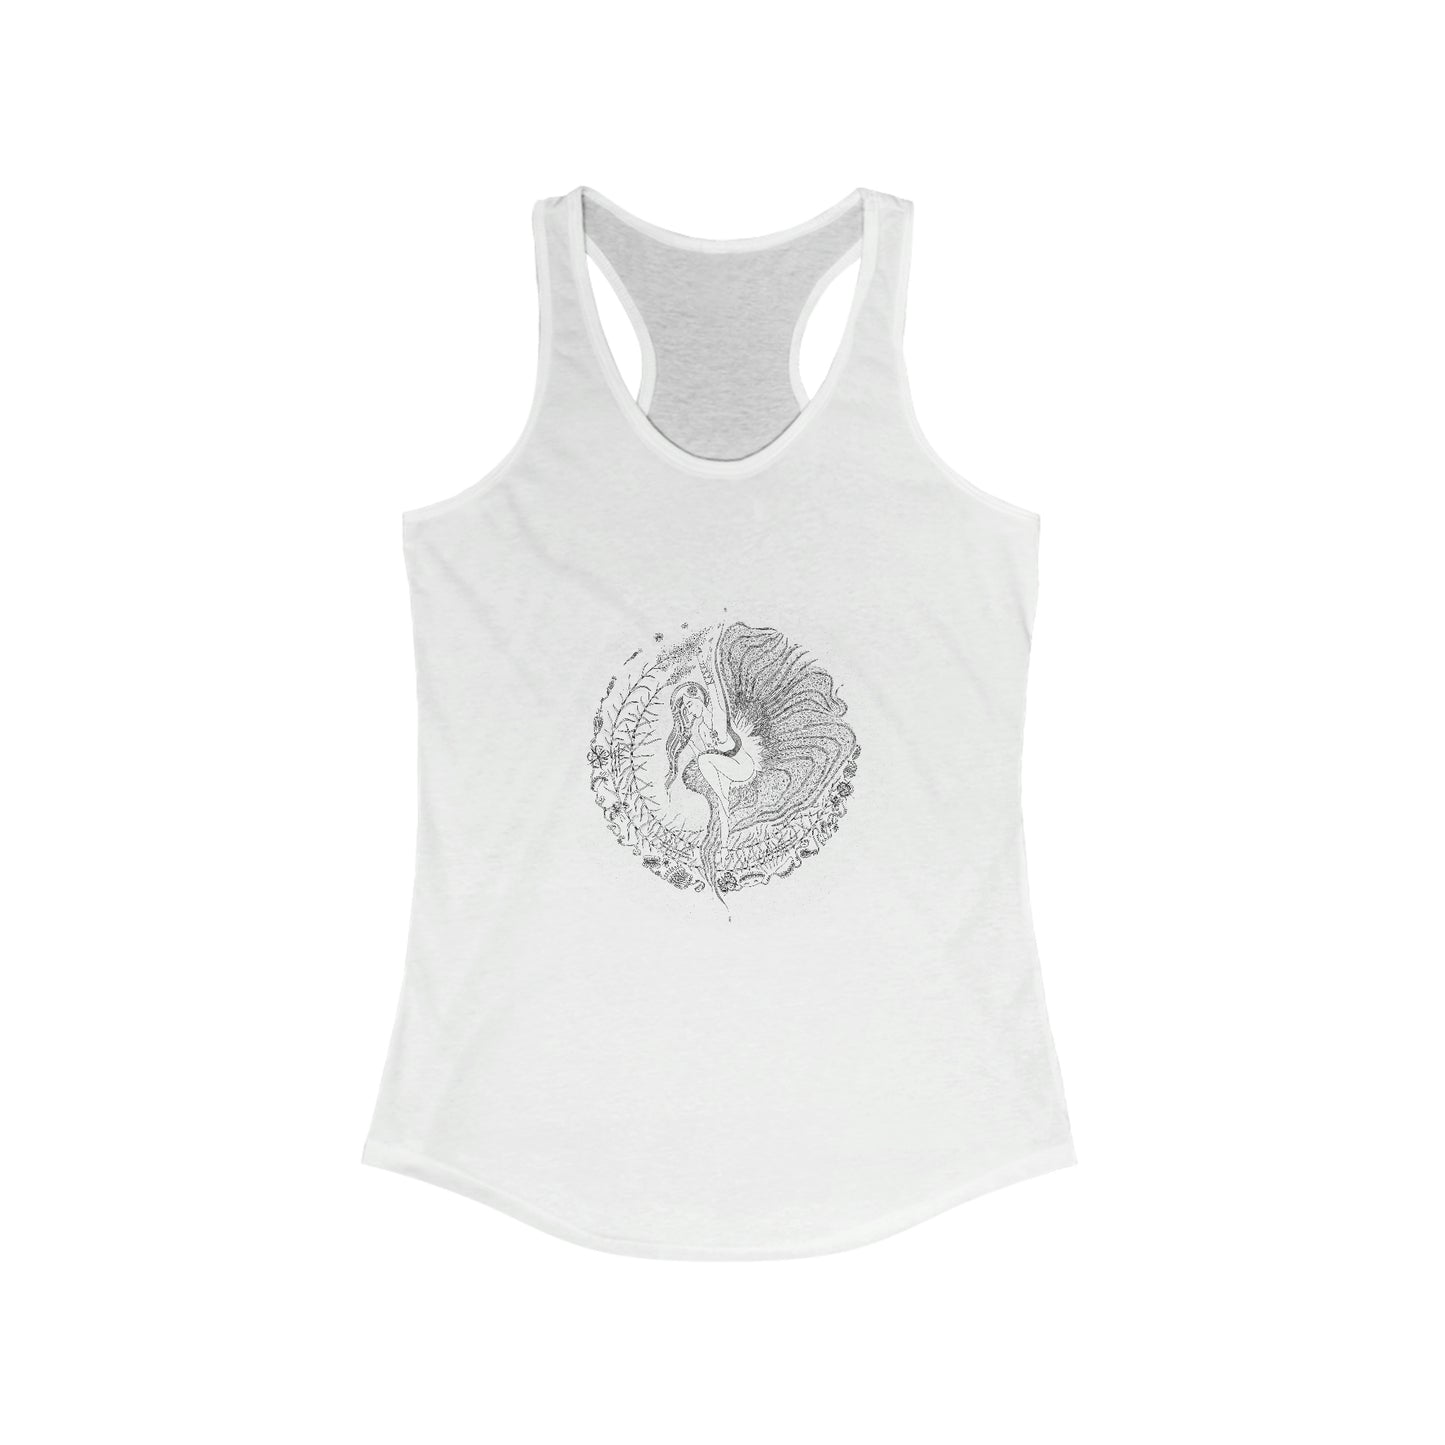 Chinese Zodiac Sign Tank Top (Rooster) Limited Edition